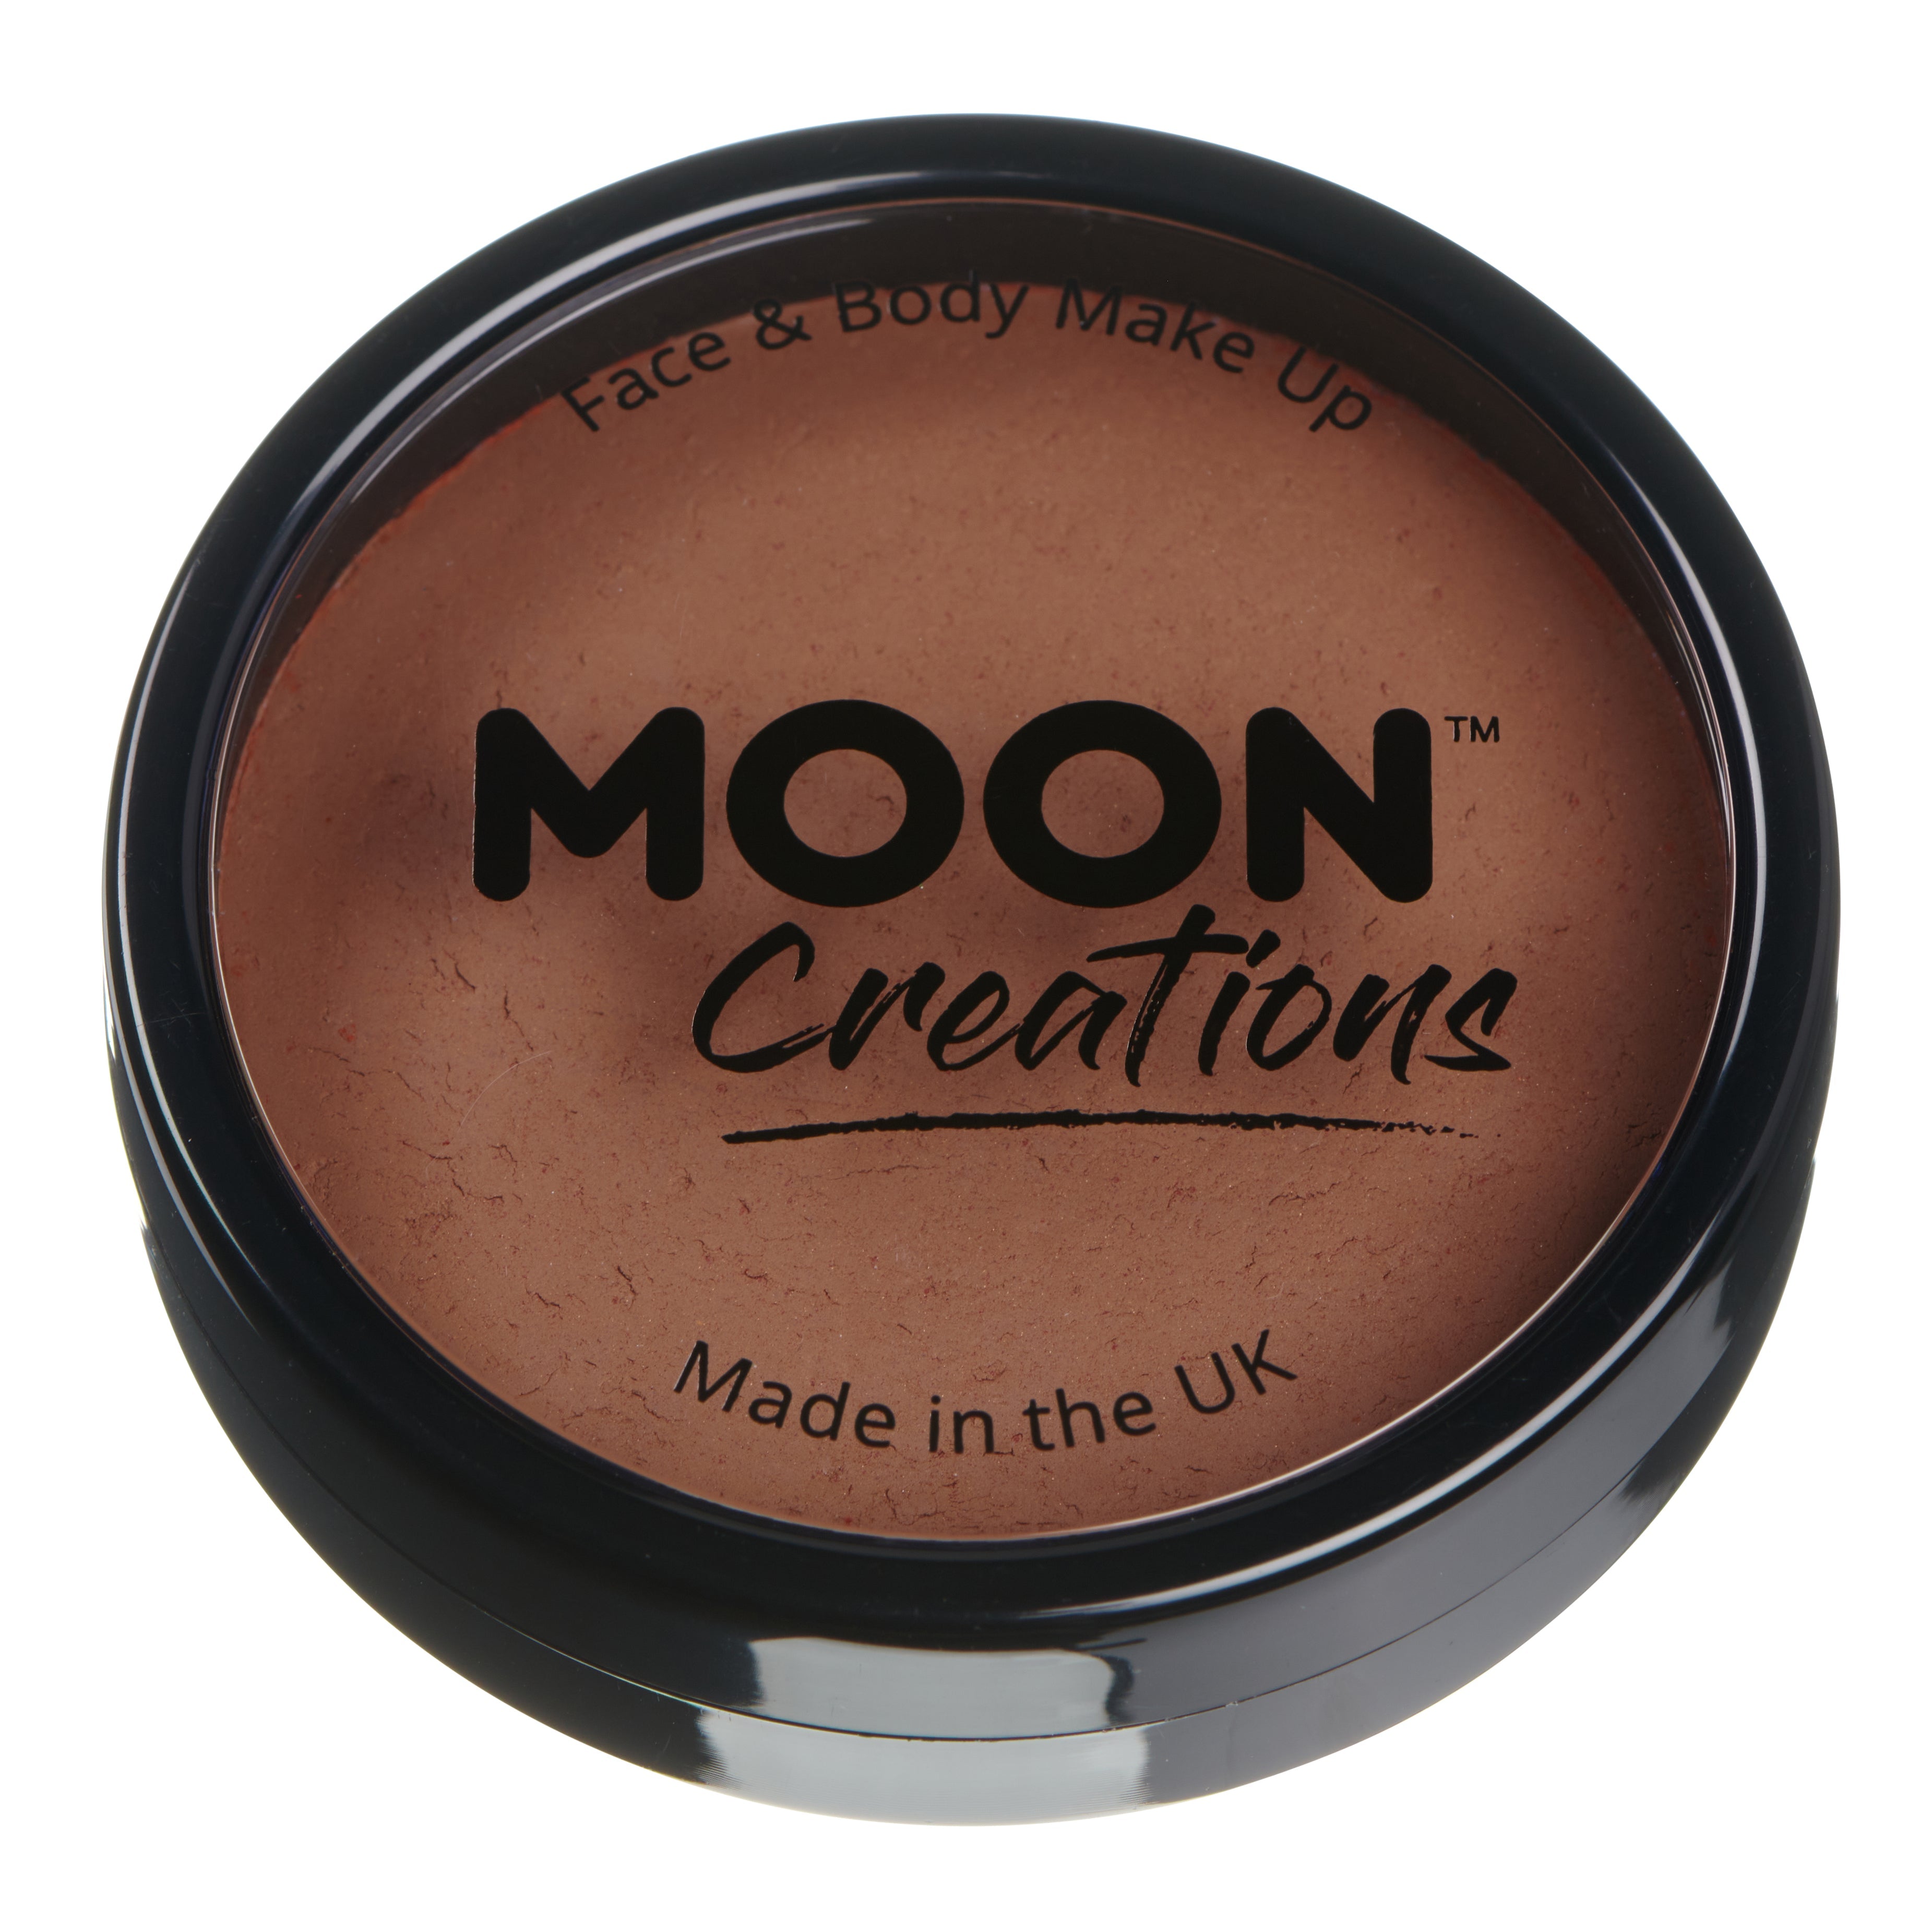 Mid Brown - Professional Face Paint, 36g. Cosmetically certified, FDA & Health Canada compliant, cruelty free and vegan.